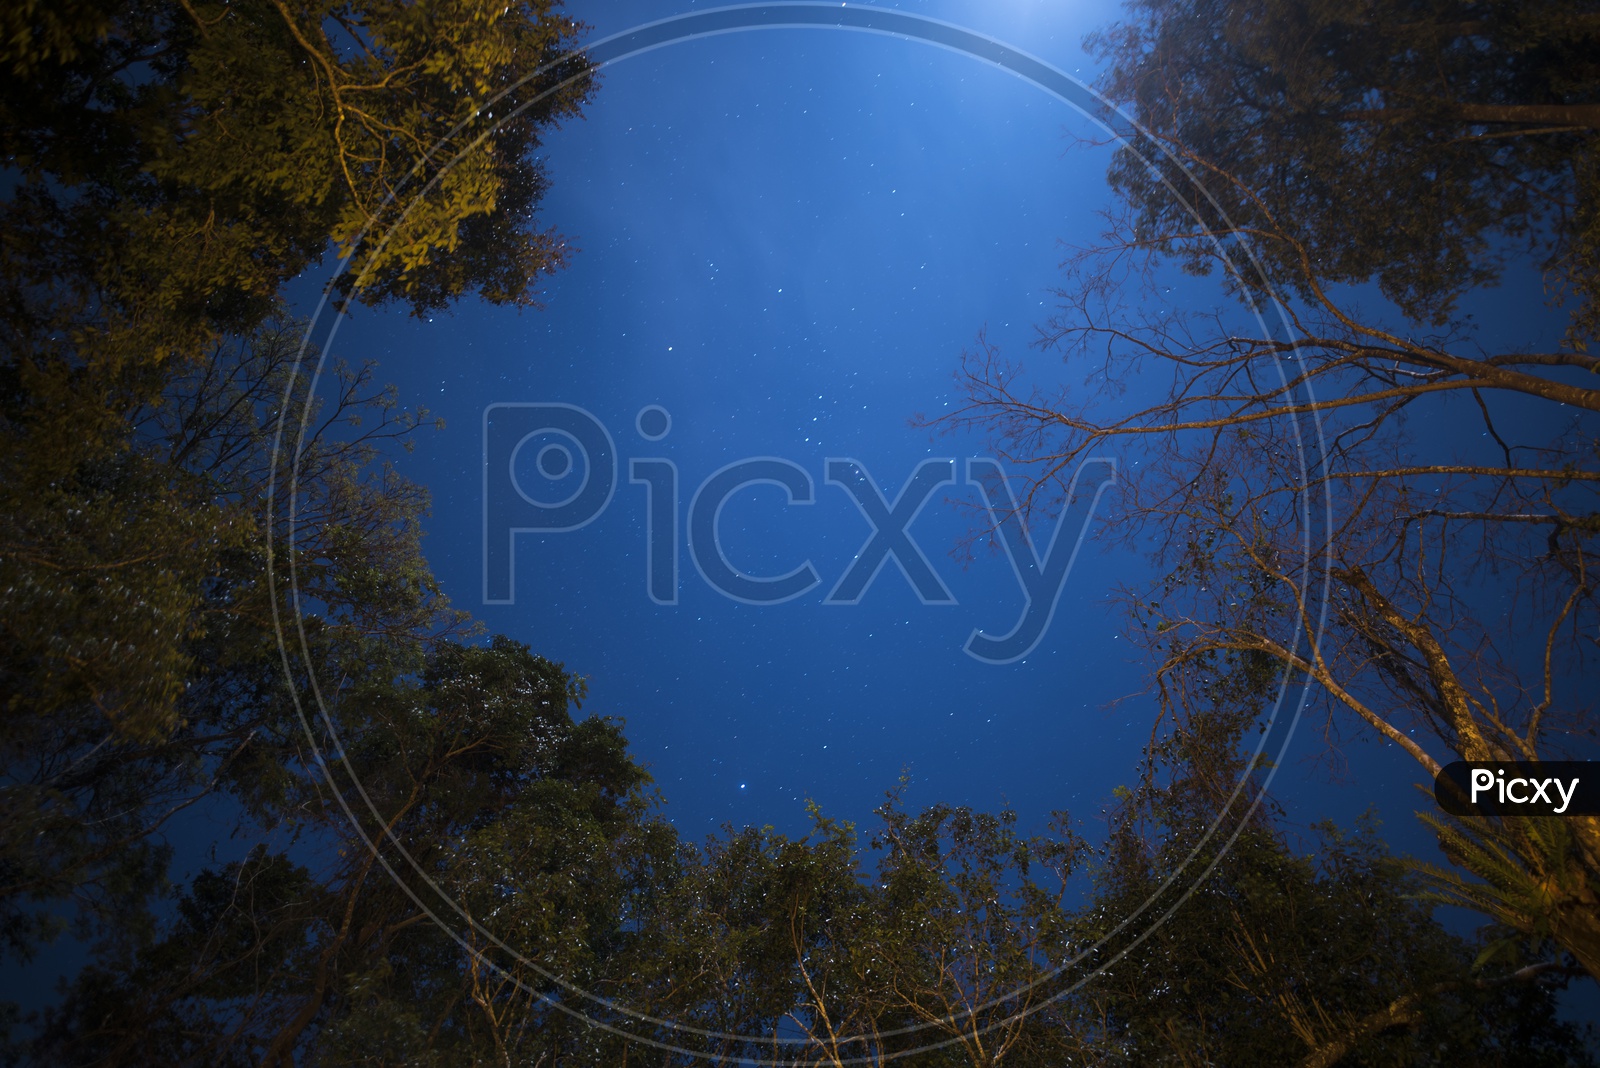 Canopy Of Trees With Blue Sky And Star Gazing in Sky Forming a Background